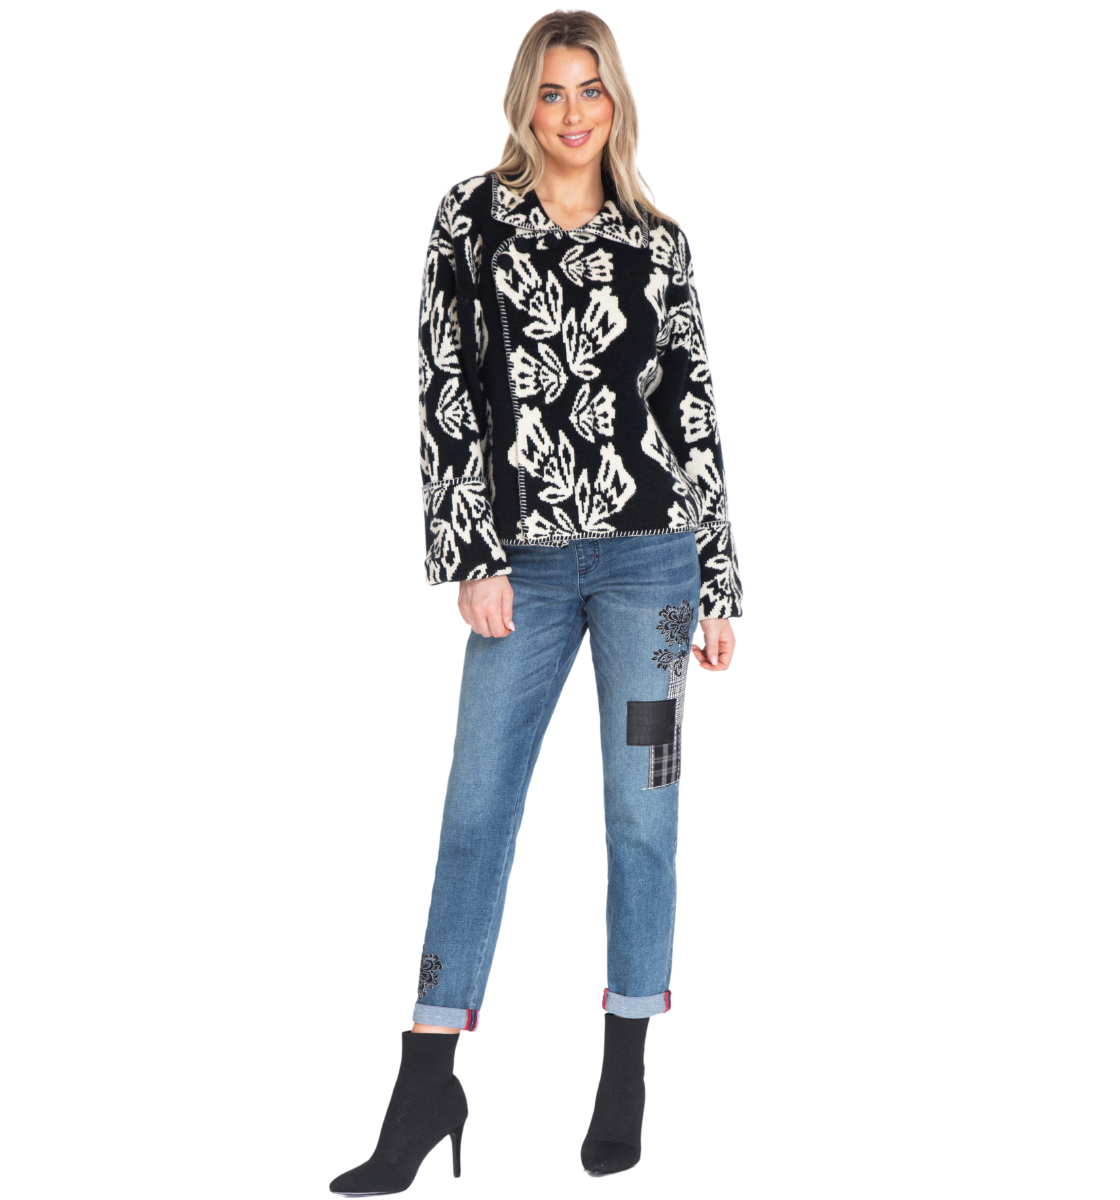 Tru Luxe Jeans  The ultimate crossover jean with a modern missy fit, –